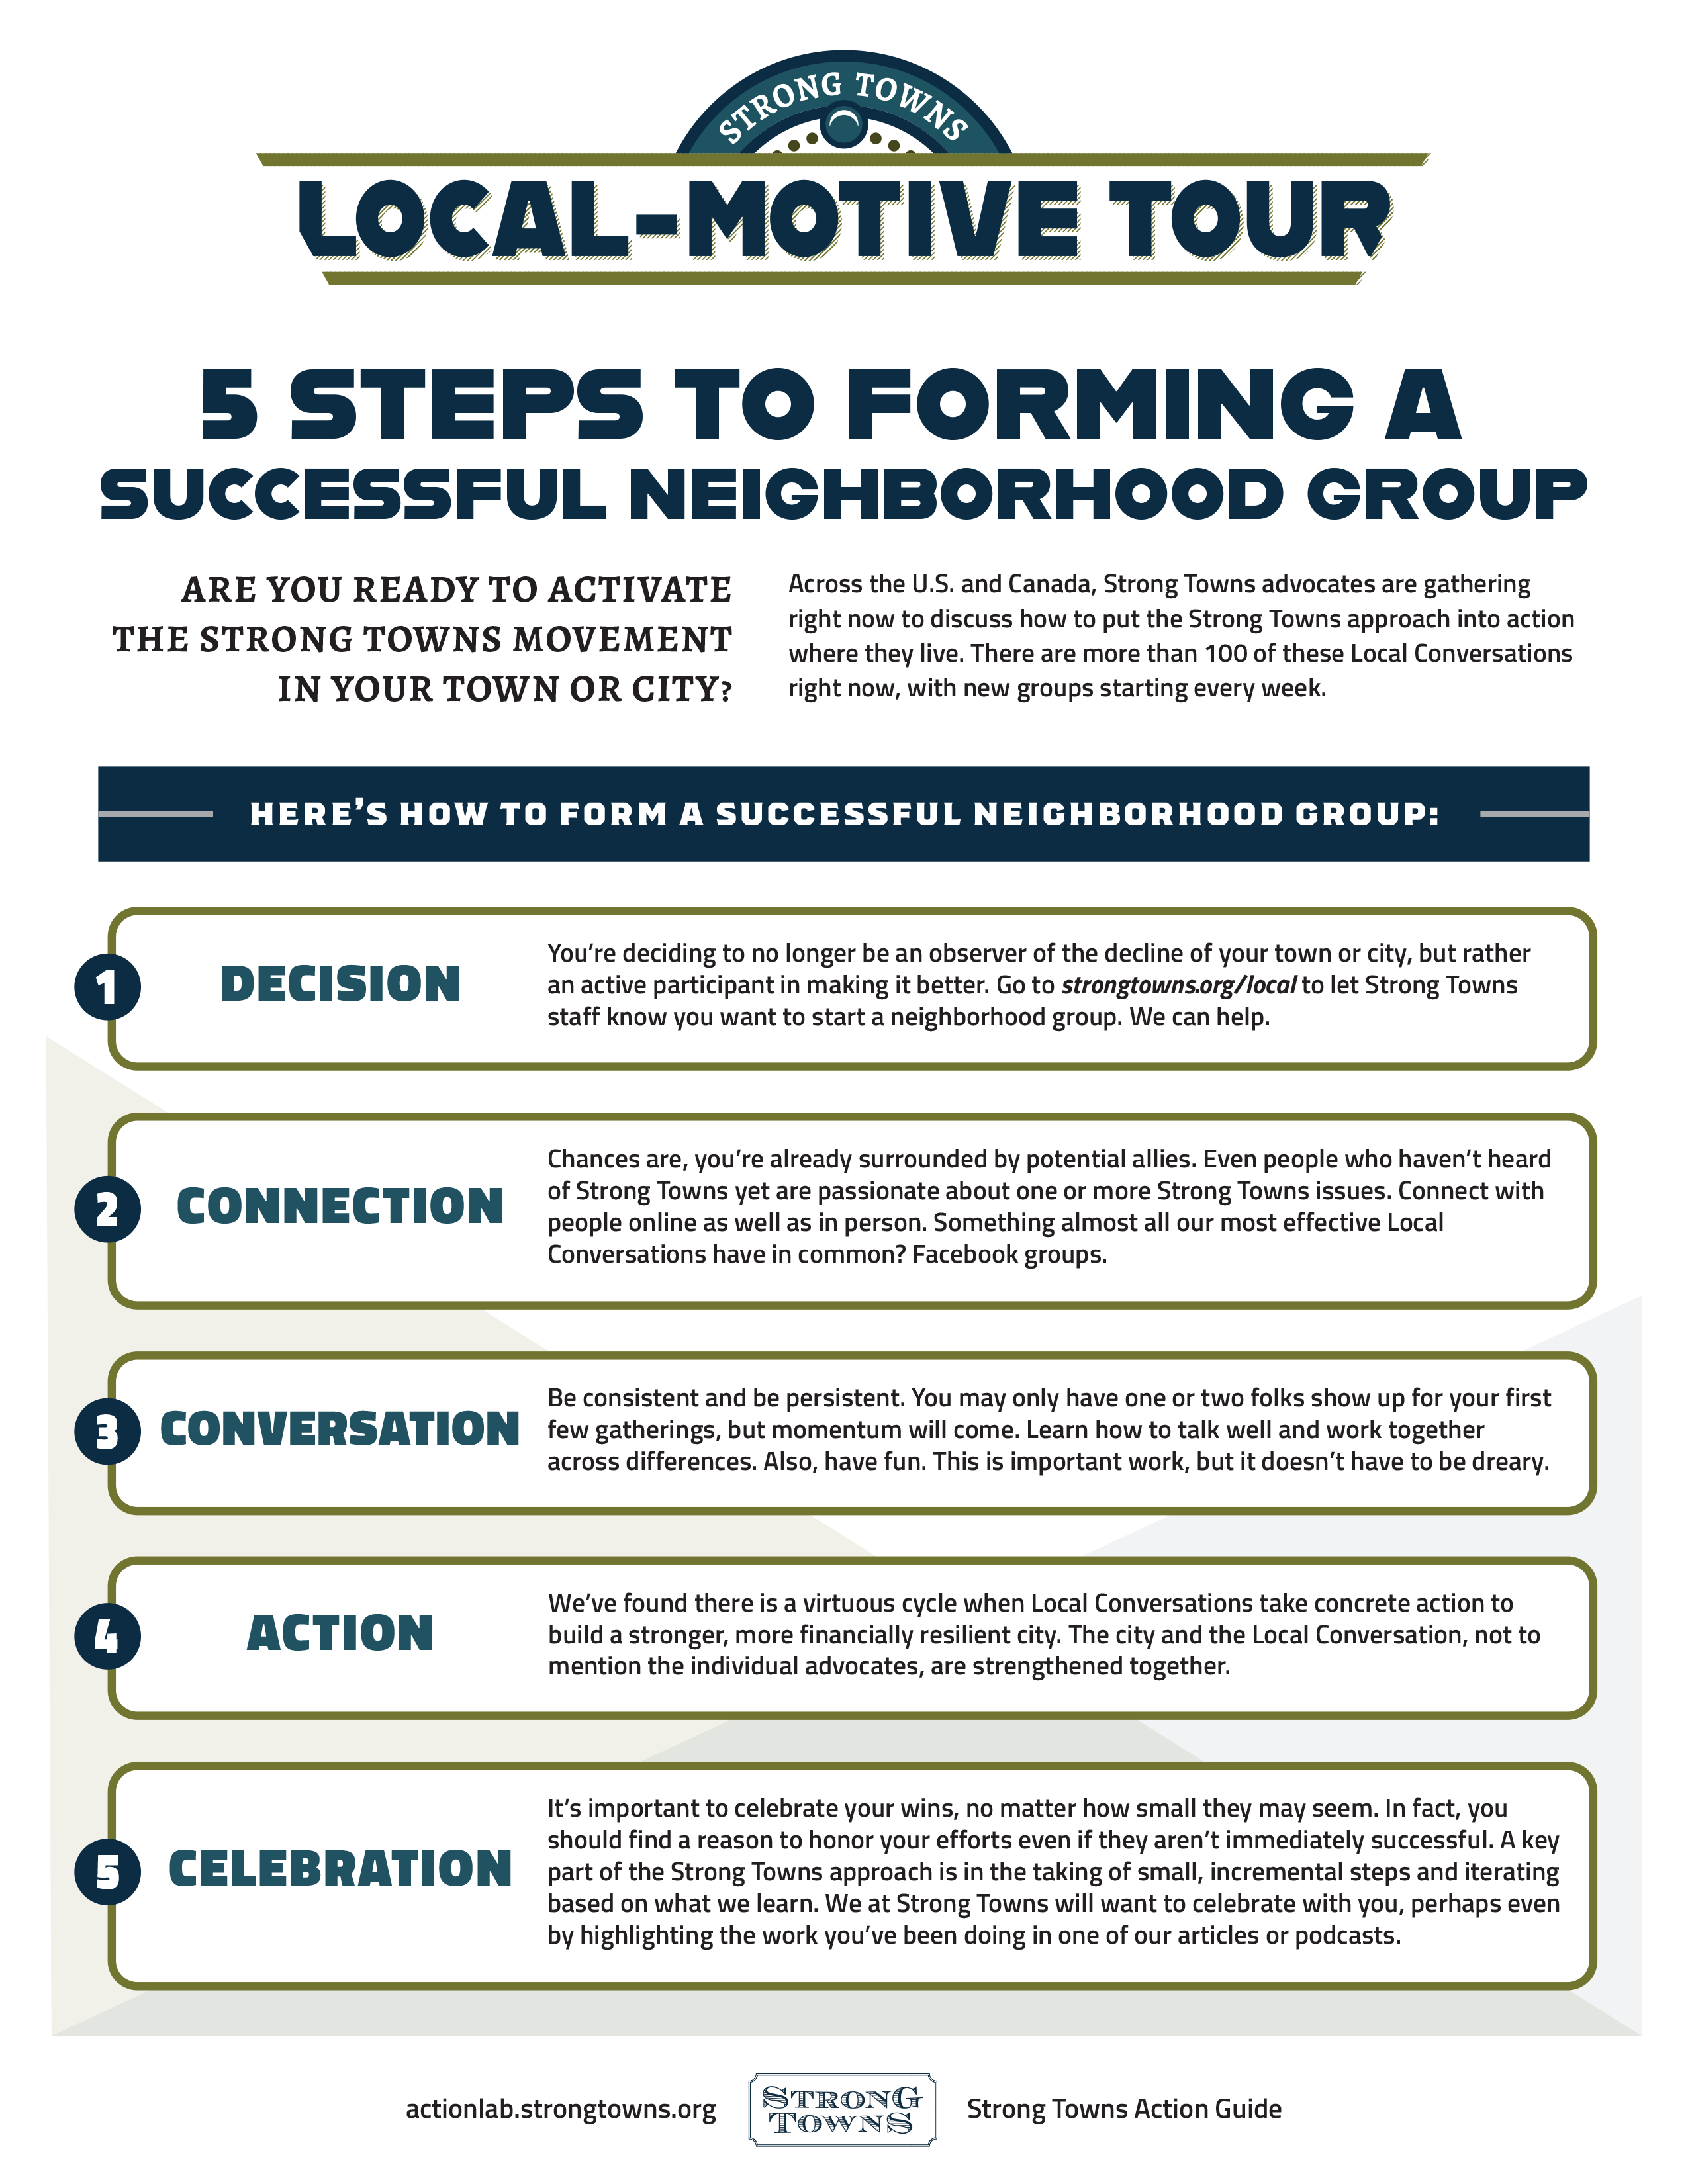 3_Strong-Towns-Action-Guide_5-Steps-Neighborhood-Group.png